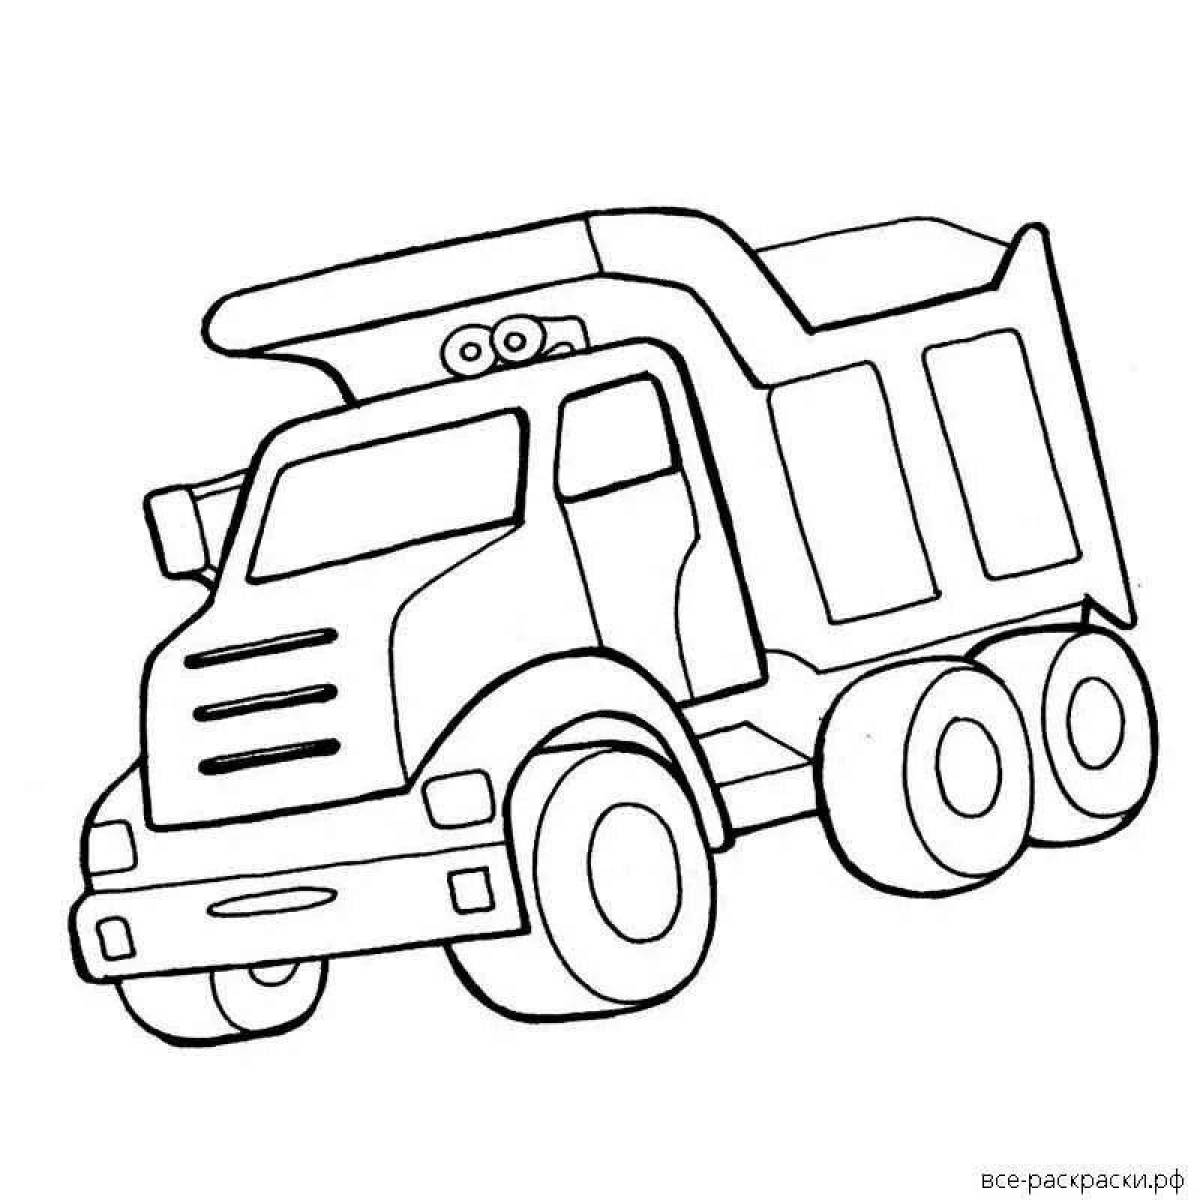 Attractive coloring book KAMAZ for children 3-4 years old